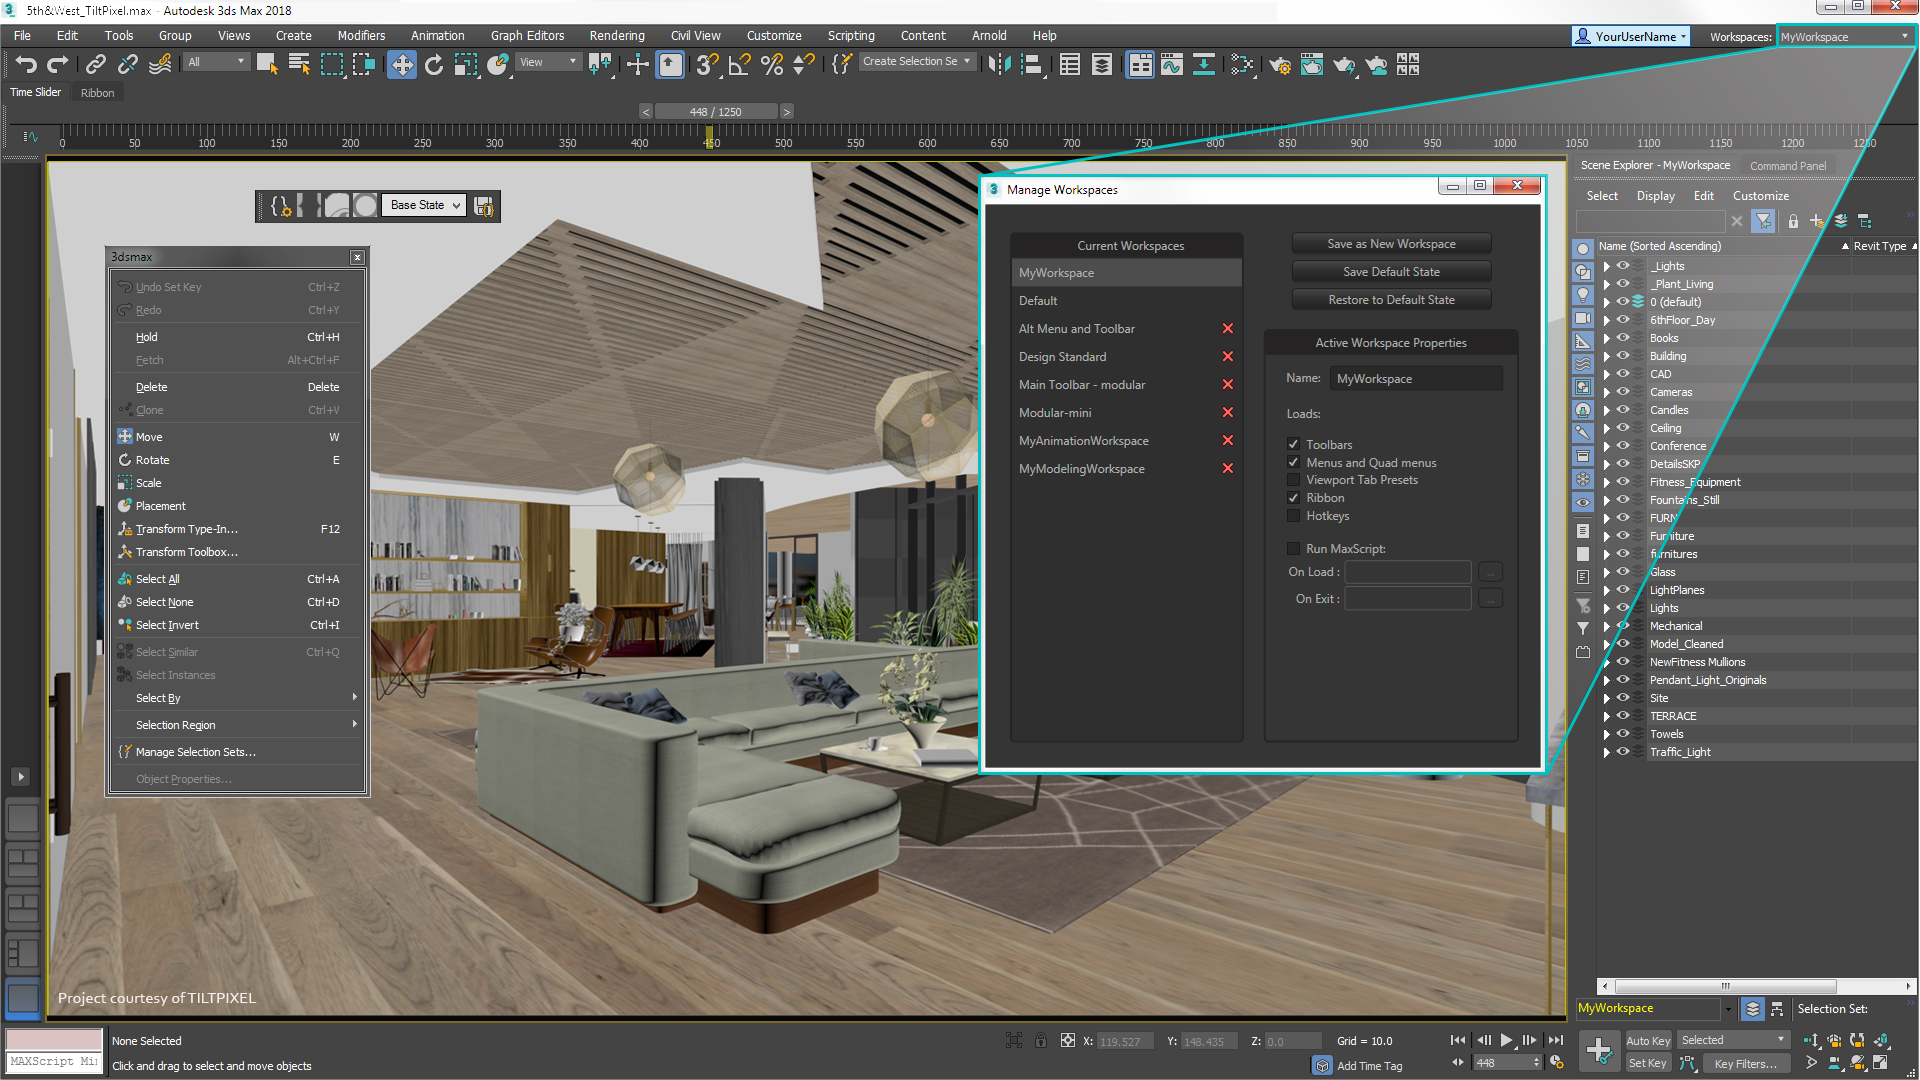 What's new in Autodesk 3ds Max 2018? - 3D Architettura